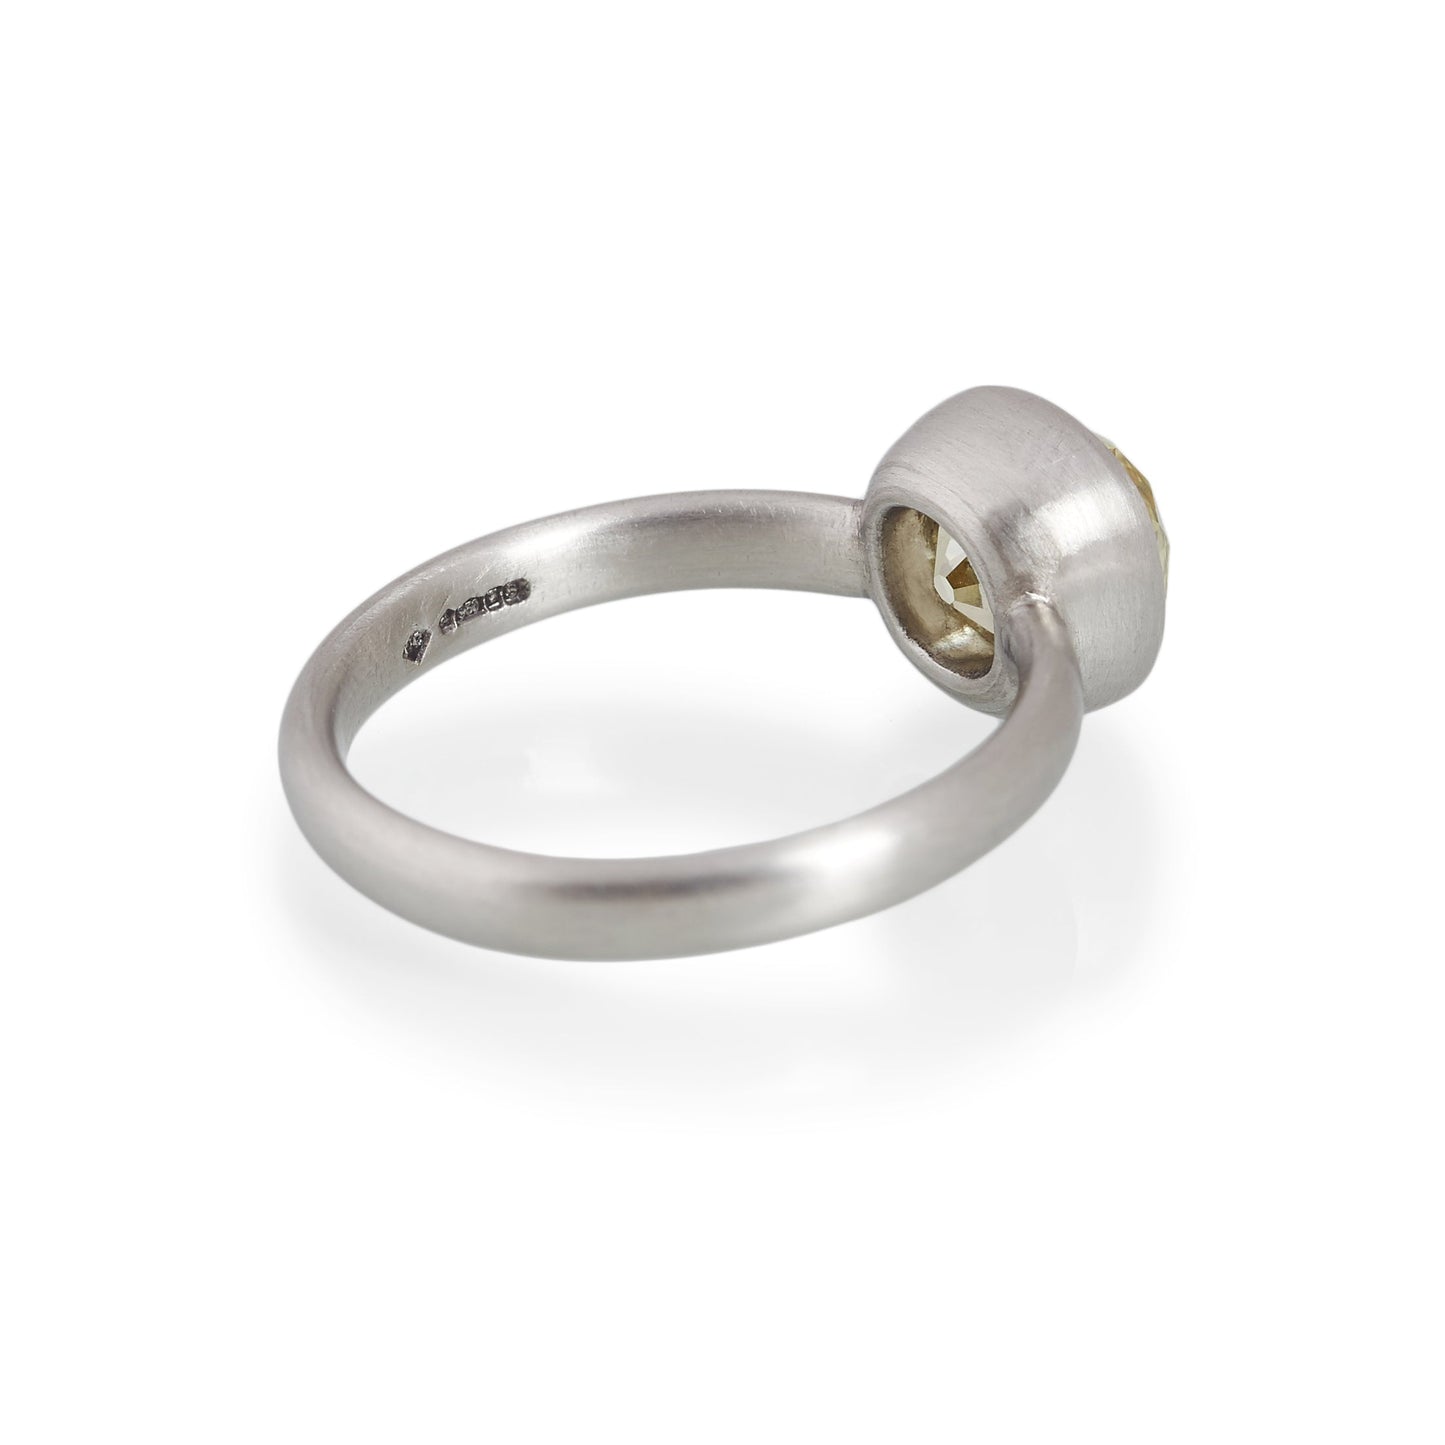 Load image into Gallery viewer, Yellow Old Mine Cut Diamond Ring, Platinum
